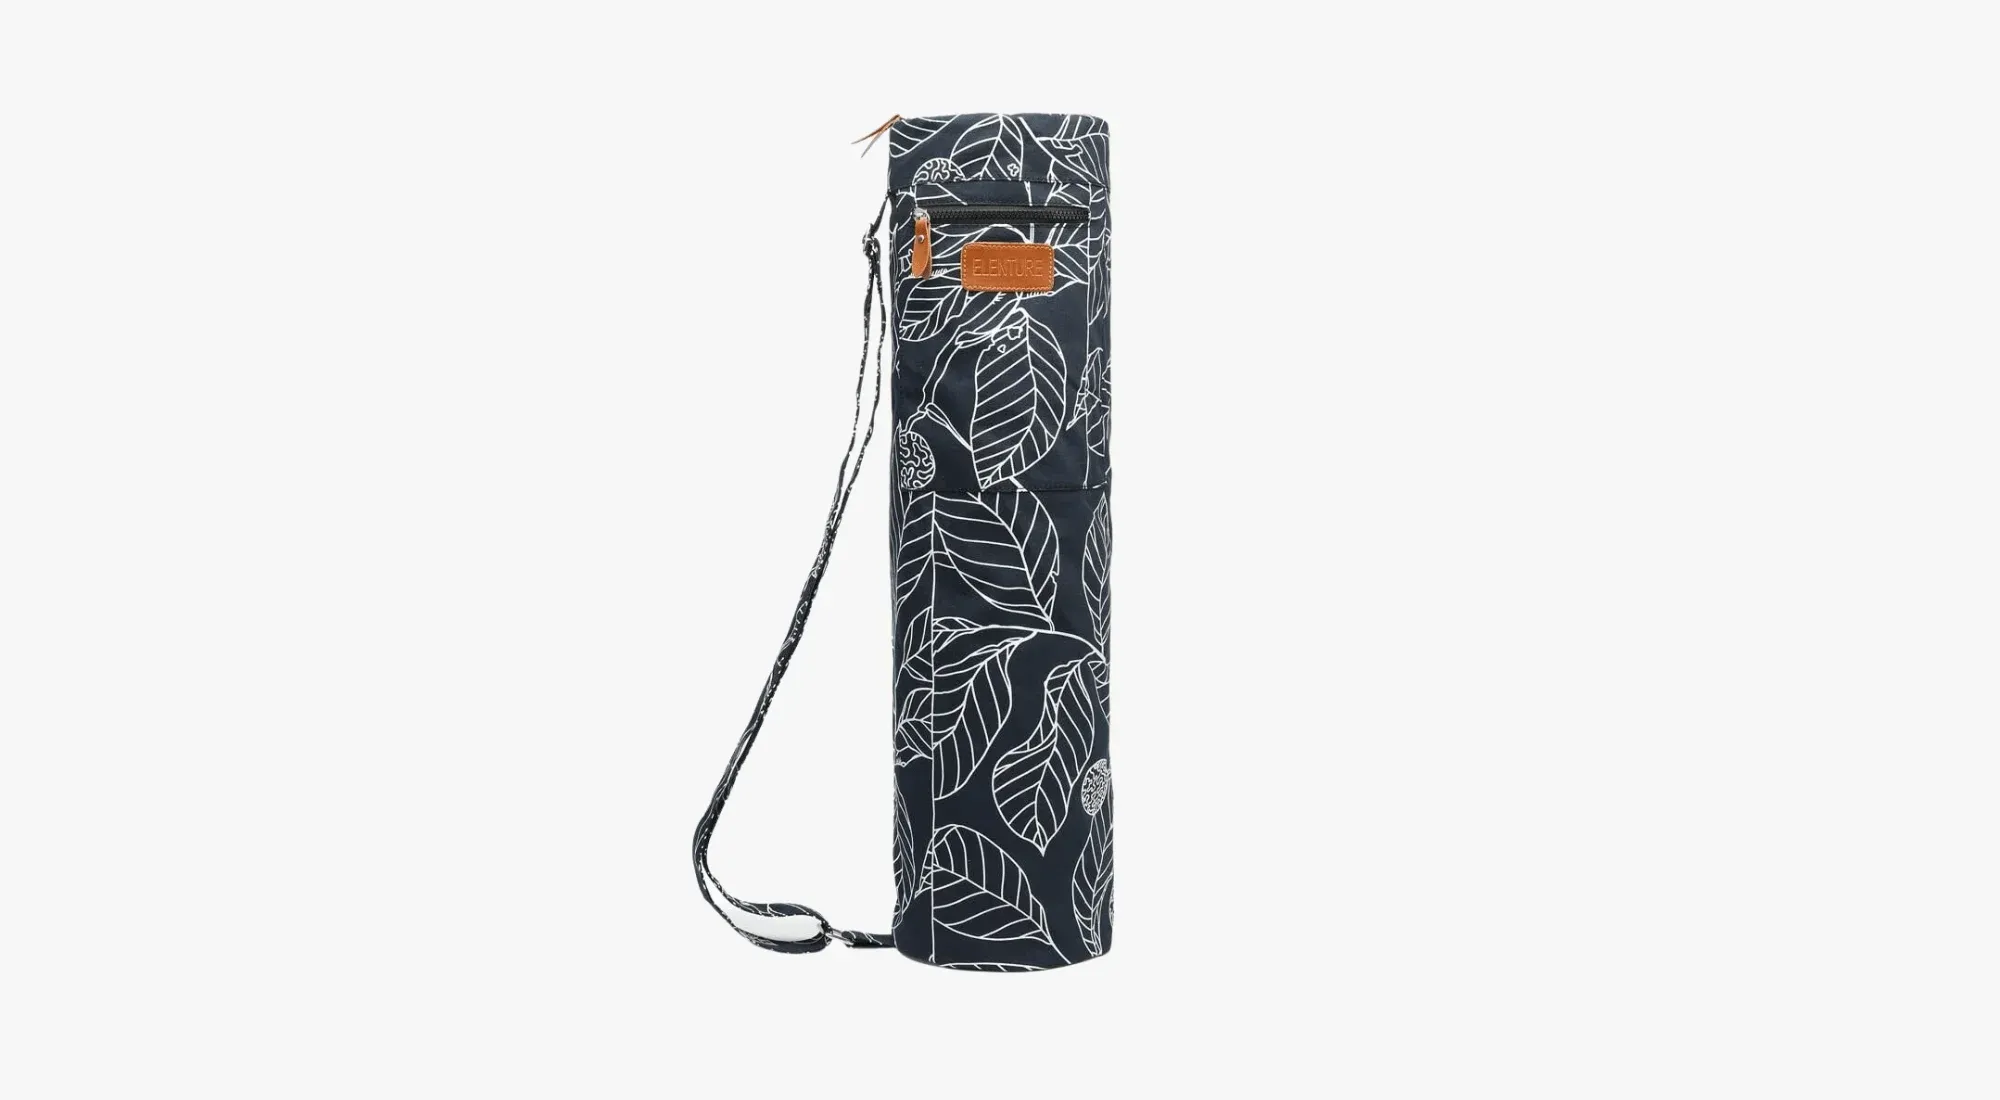 Is the Yogo Foldable Yoga Mat the Right Mat for Your Travels?